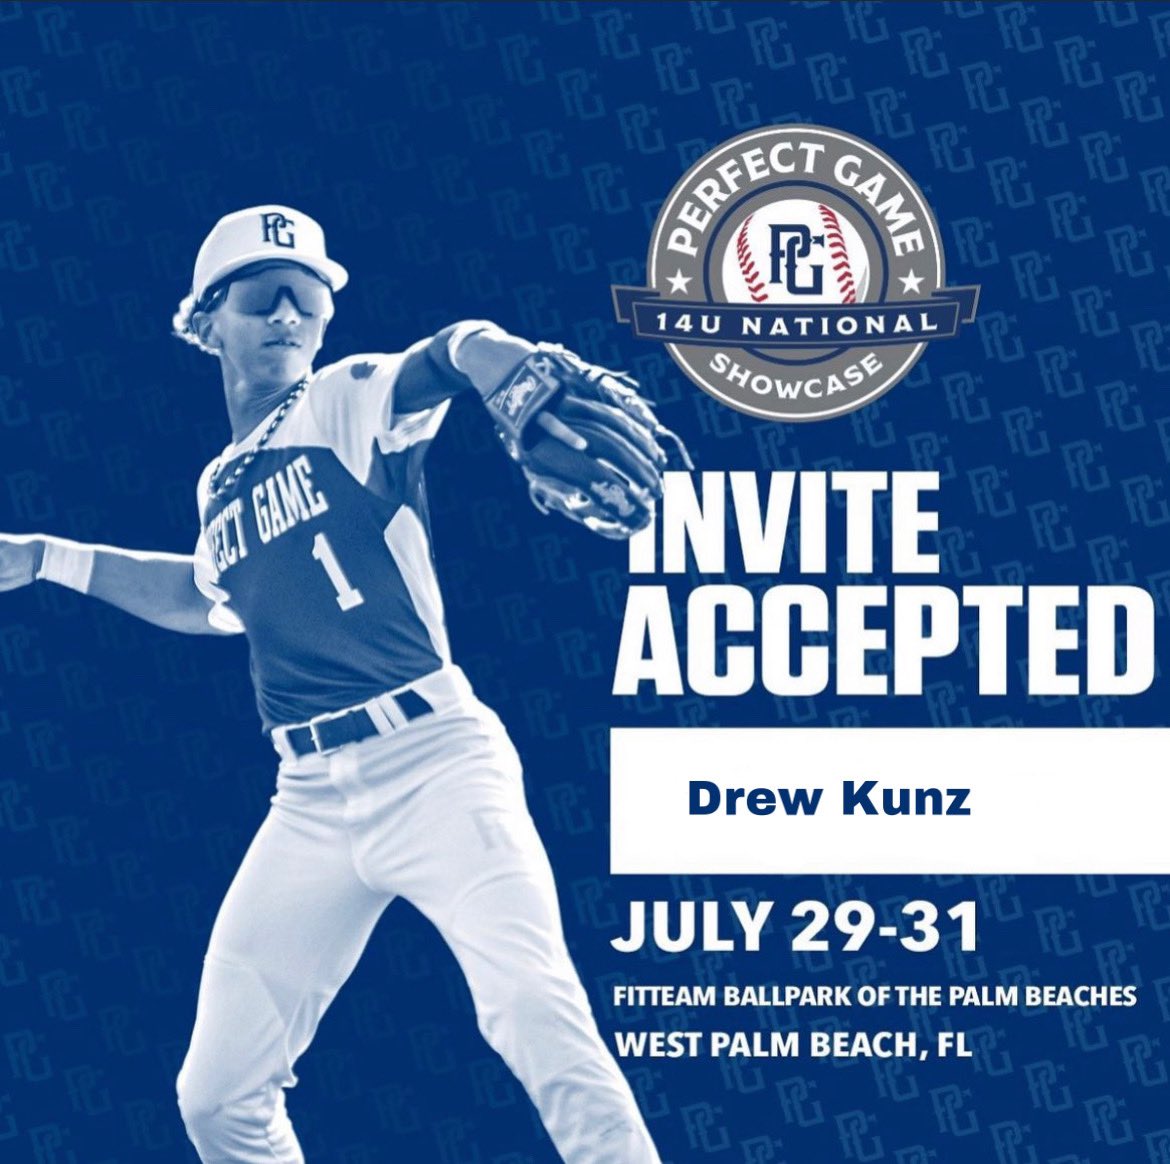 Thanks @PerfectGameUSA for the amazing opportunity. Thank you @Jmarlo22 @mjordan44 @Revolution_SP @BMC_Baseball @PowerBSB for helping me along the way. @ERathmann3 @TrentonRamsey35 Can’t wait to see you there.